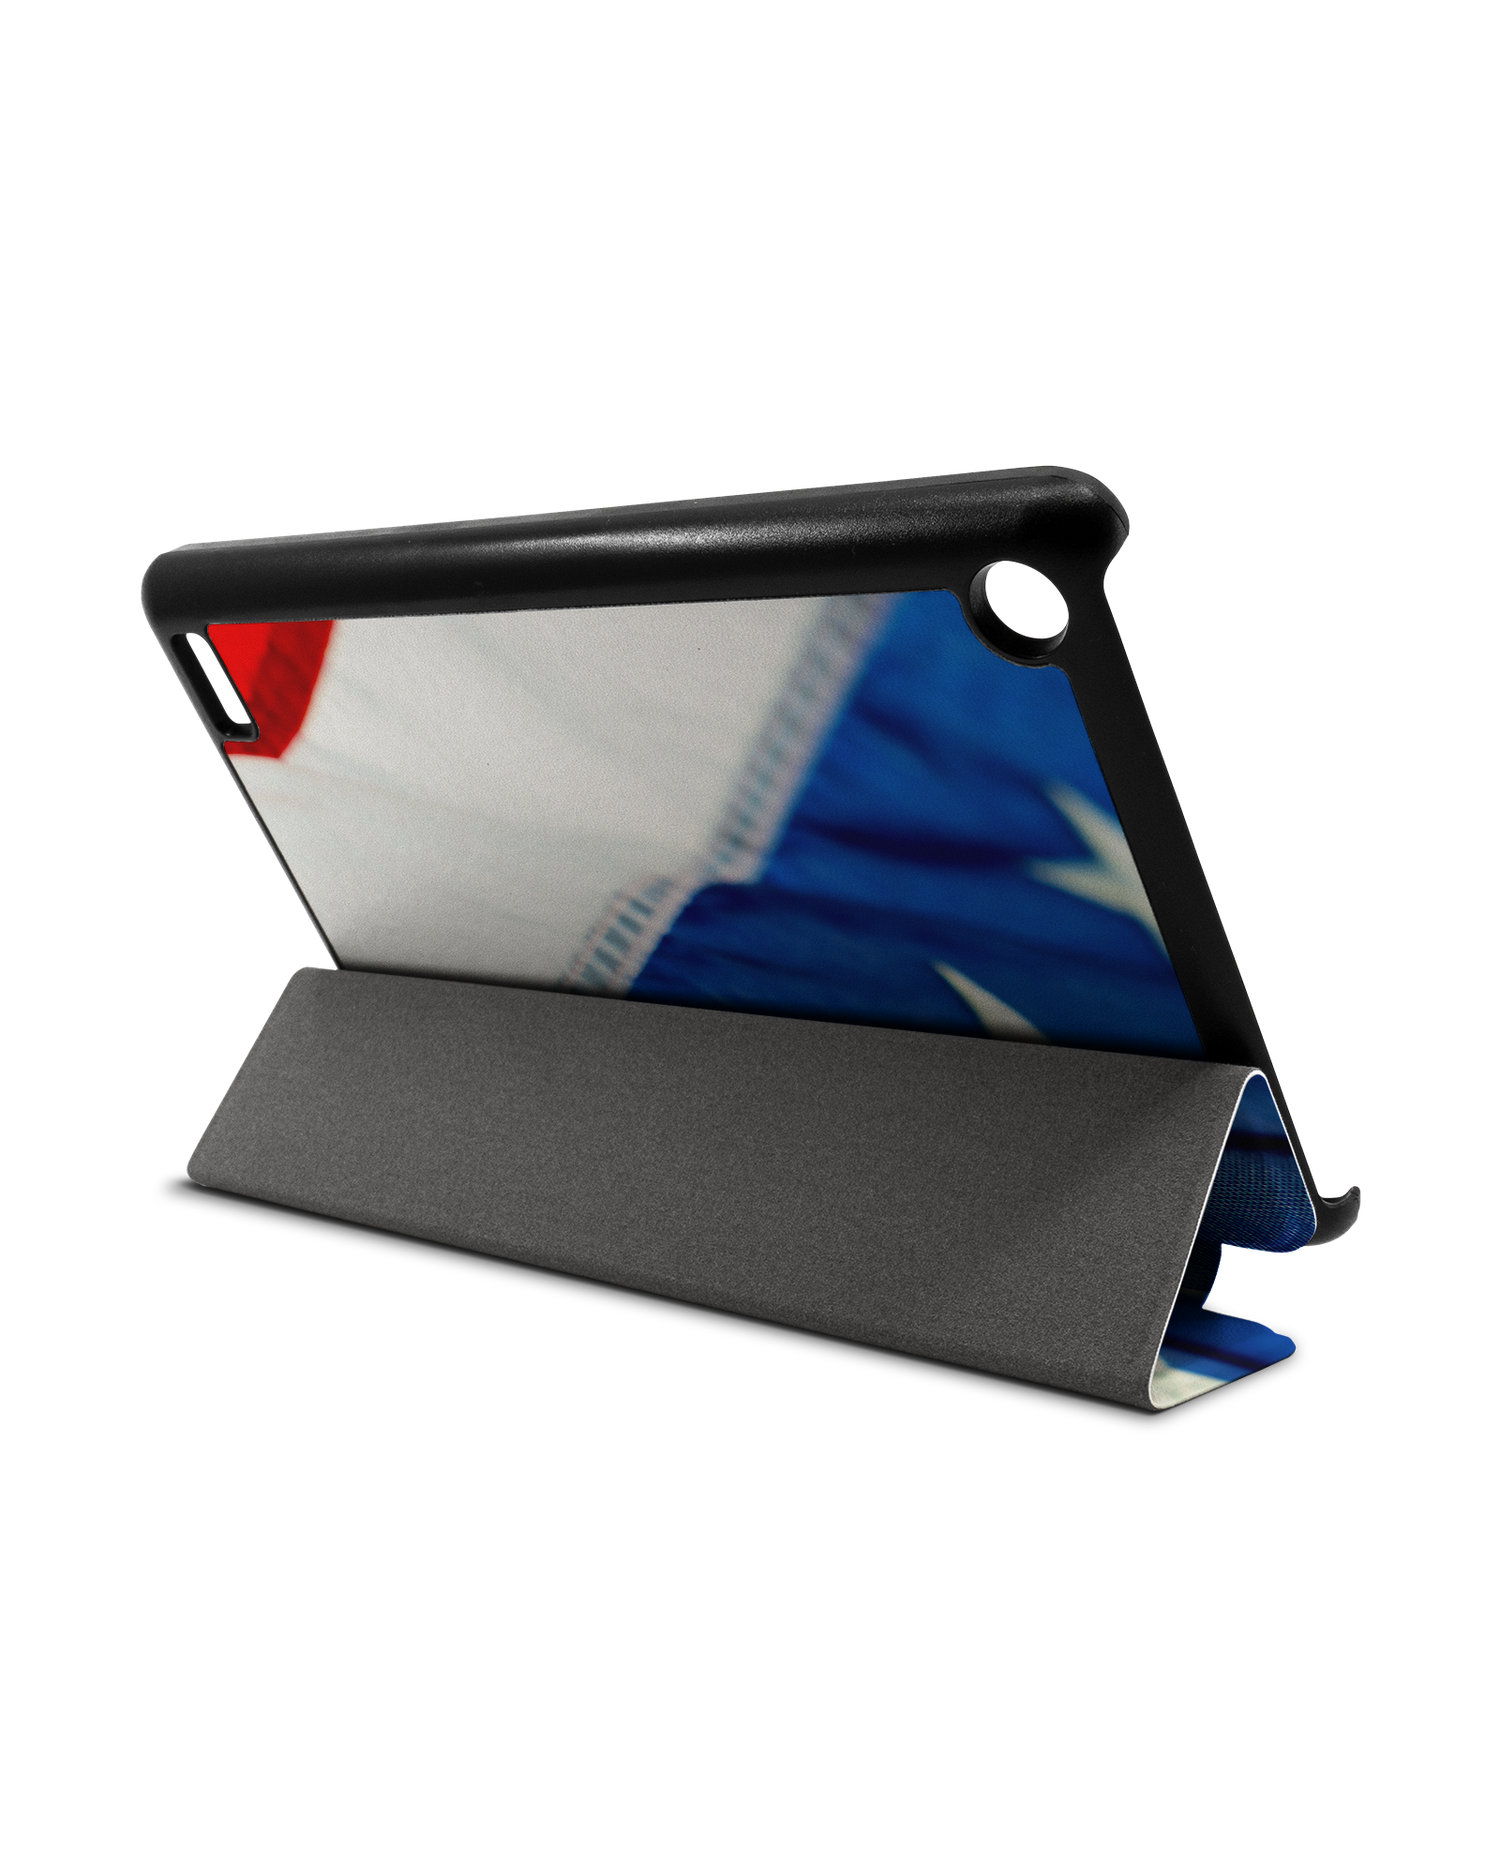 Stars And Stripes Tablet Smart Case for Amazon Fire 7: Used as Stand